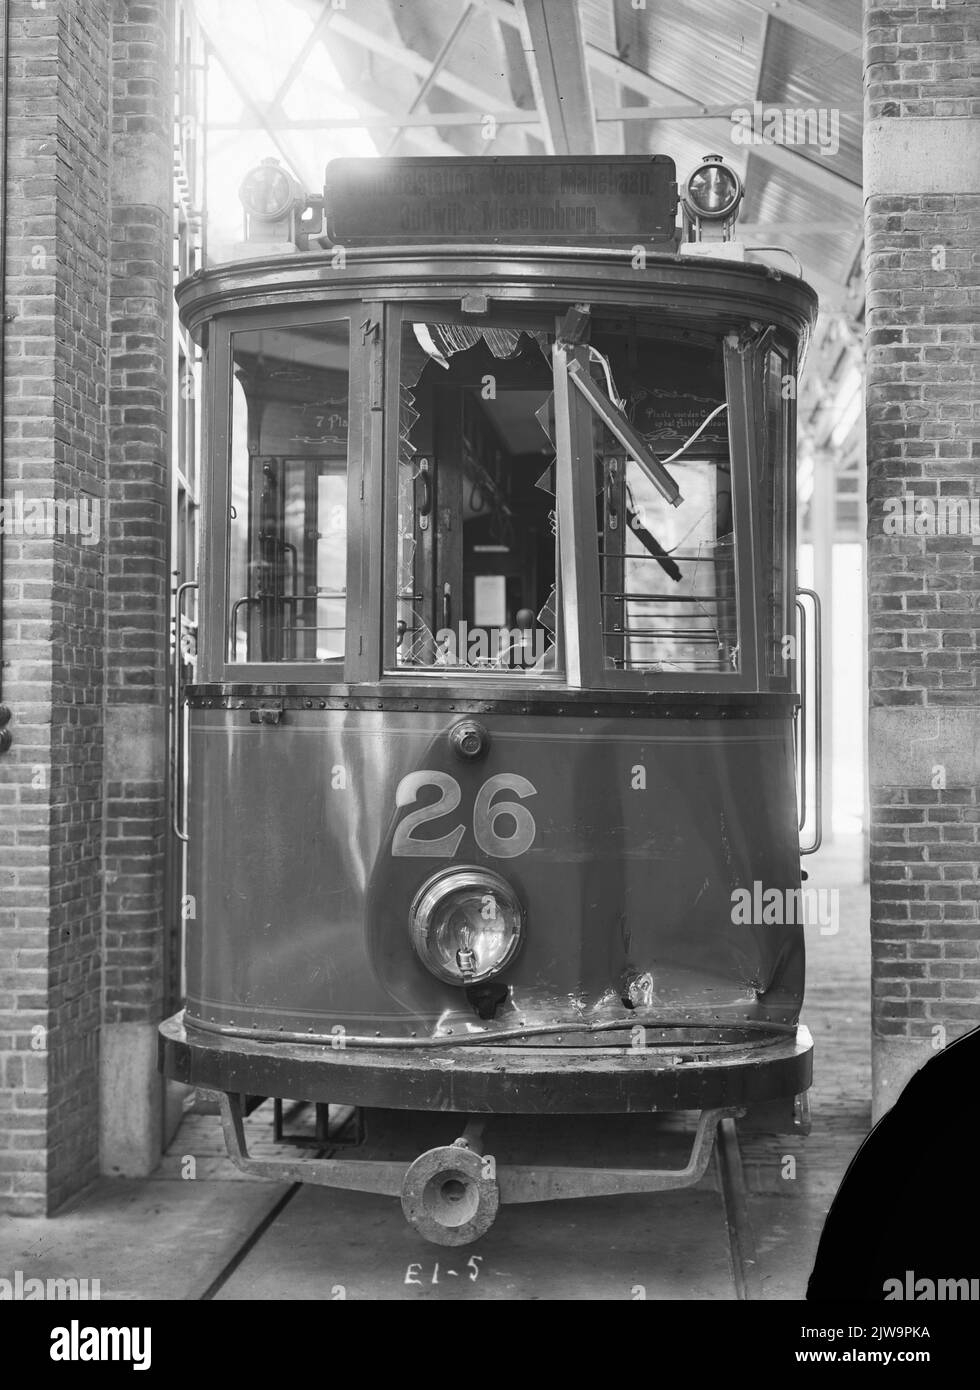 Image of the dented front of a electrical tram damaged after a collision (motor car no. 26, series 21-32) of the G.E.T.U. In the draw on the Nicolaas Beestsstraat in Utrecht.n.b. The collision took place on June 17, 1907, the Chief Wagen Director G. J. de Jong had to contribute to the repair costs NLG 0.50. Stock Photo